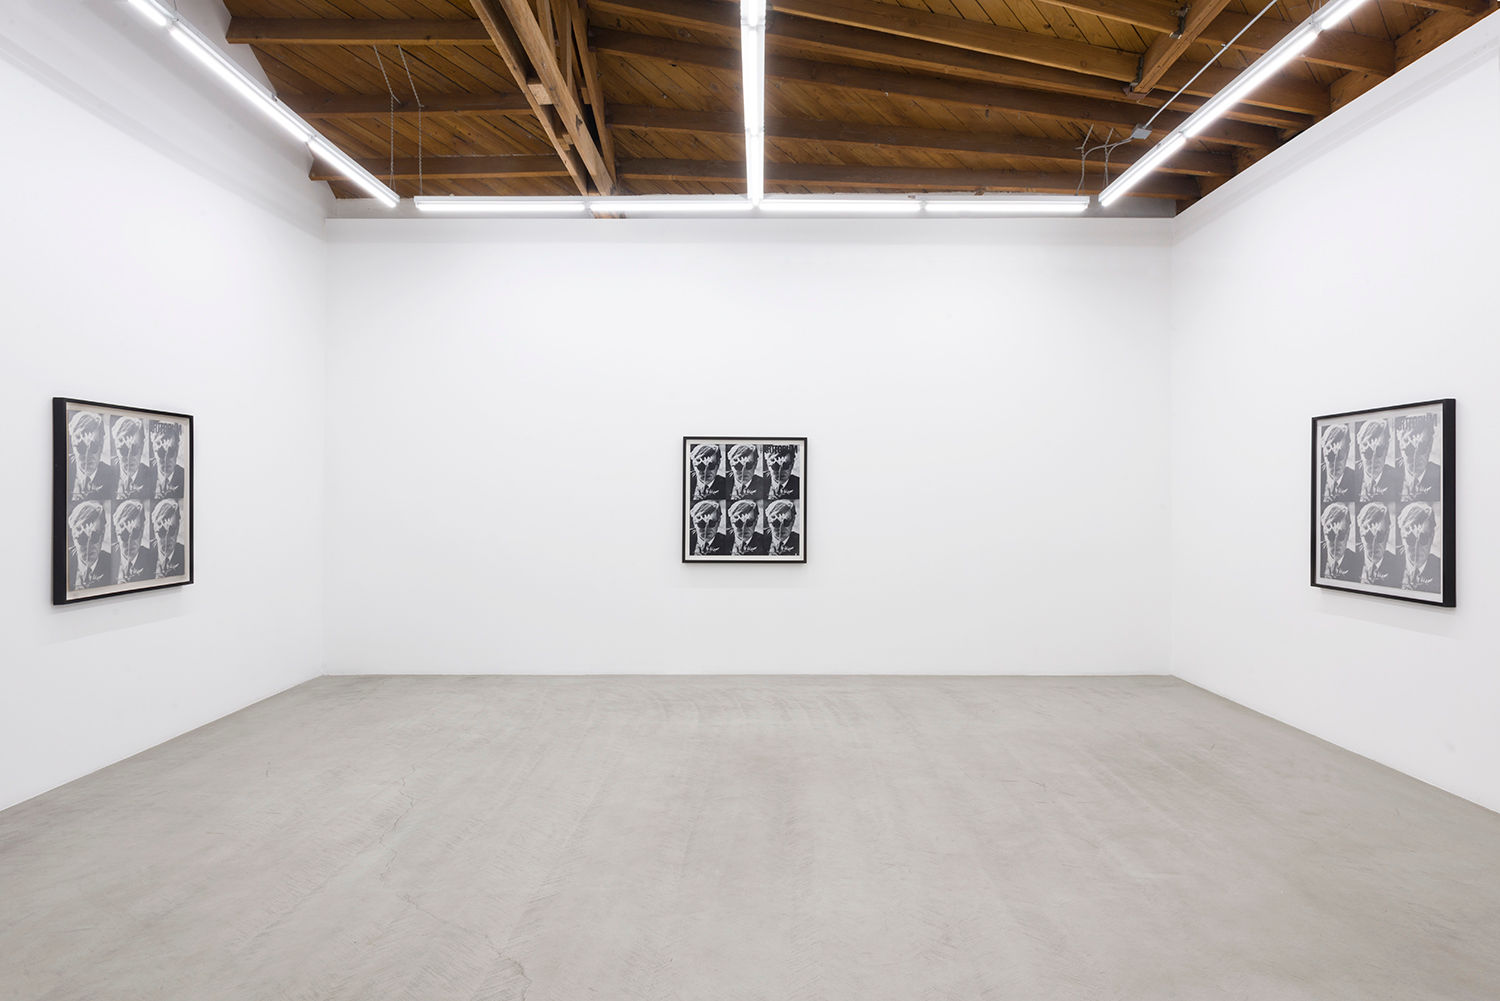 Installation image for Dennis Hopper: Morocco Paintings, at parrasch heijnen